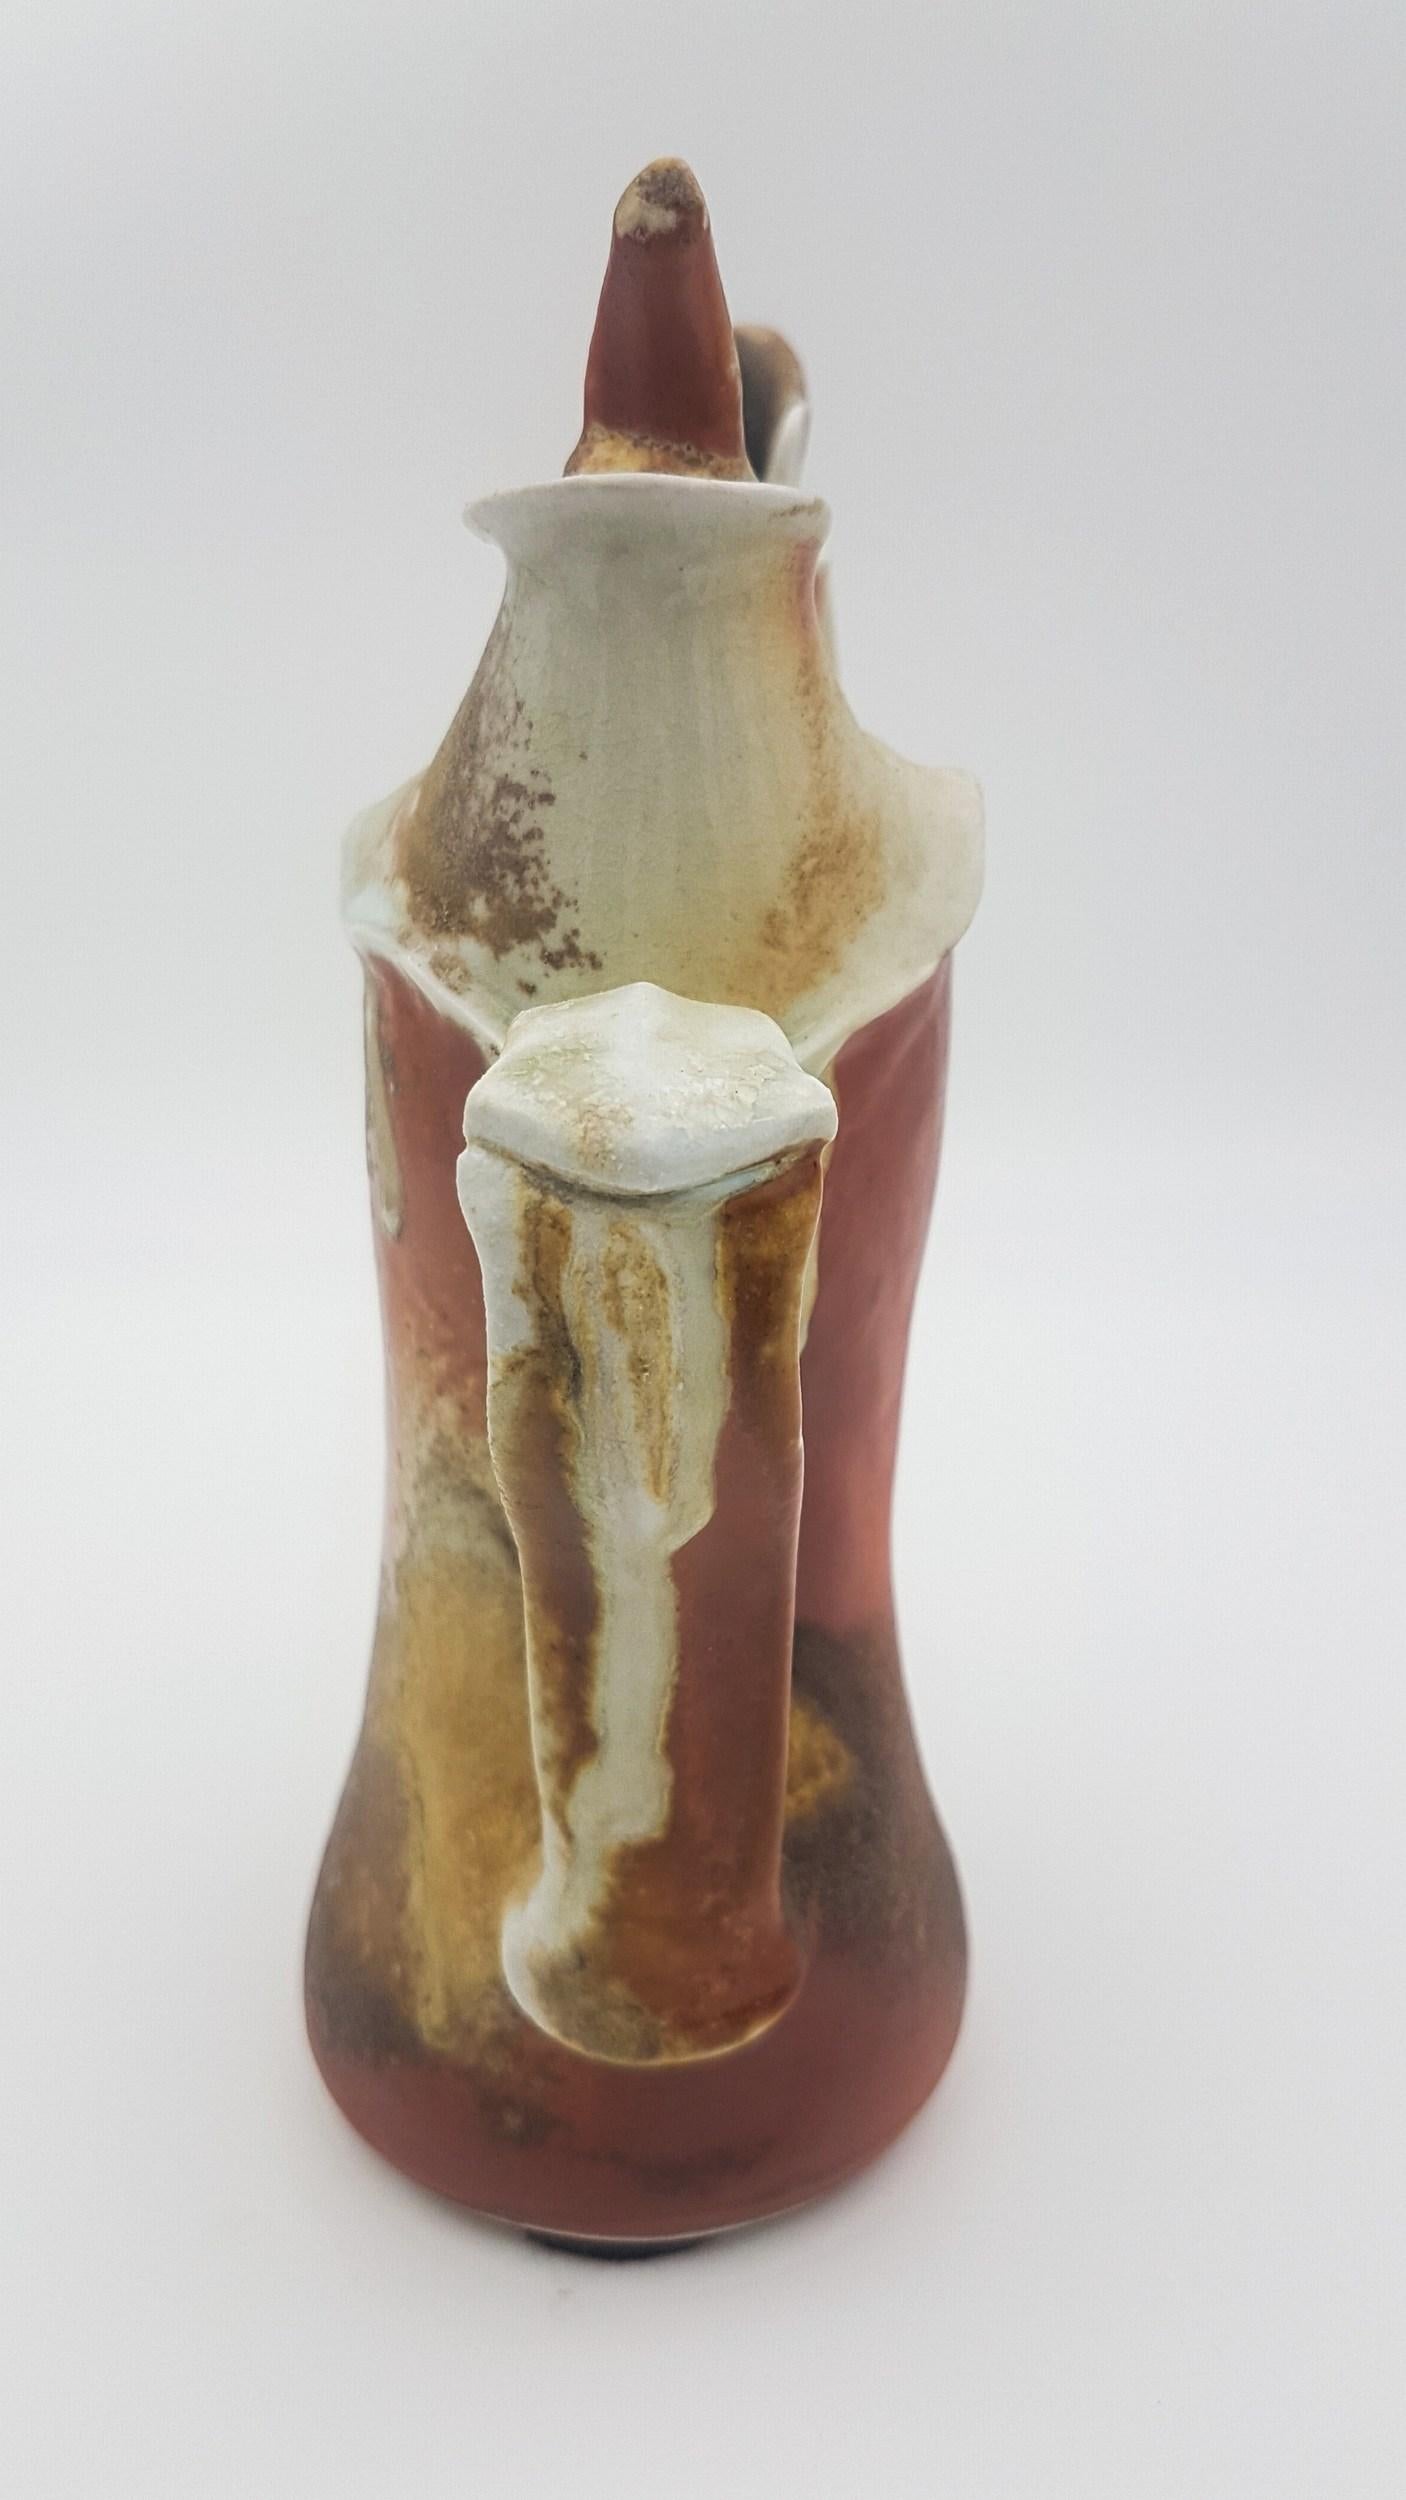 Wood Fired Pitcher (Anagama, Cave, Kiln, Dan Anderson, Rustic) - Gray Abstract Sculpture by Melanie Sherman